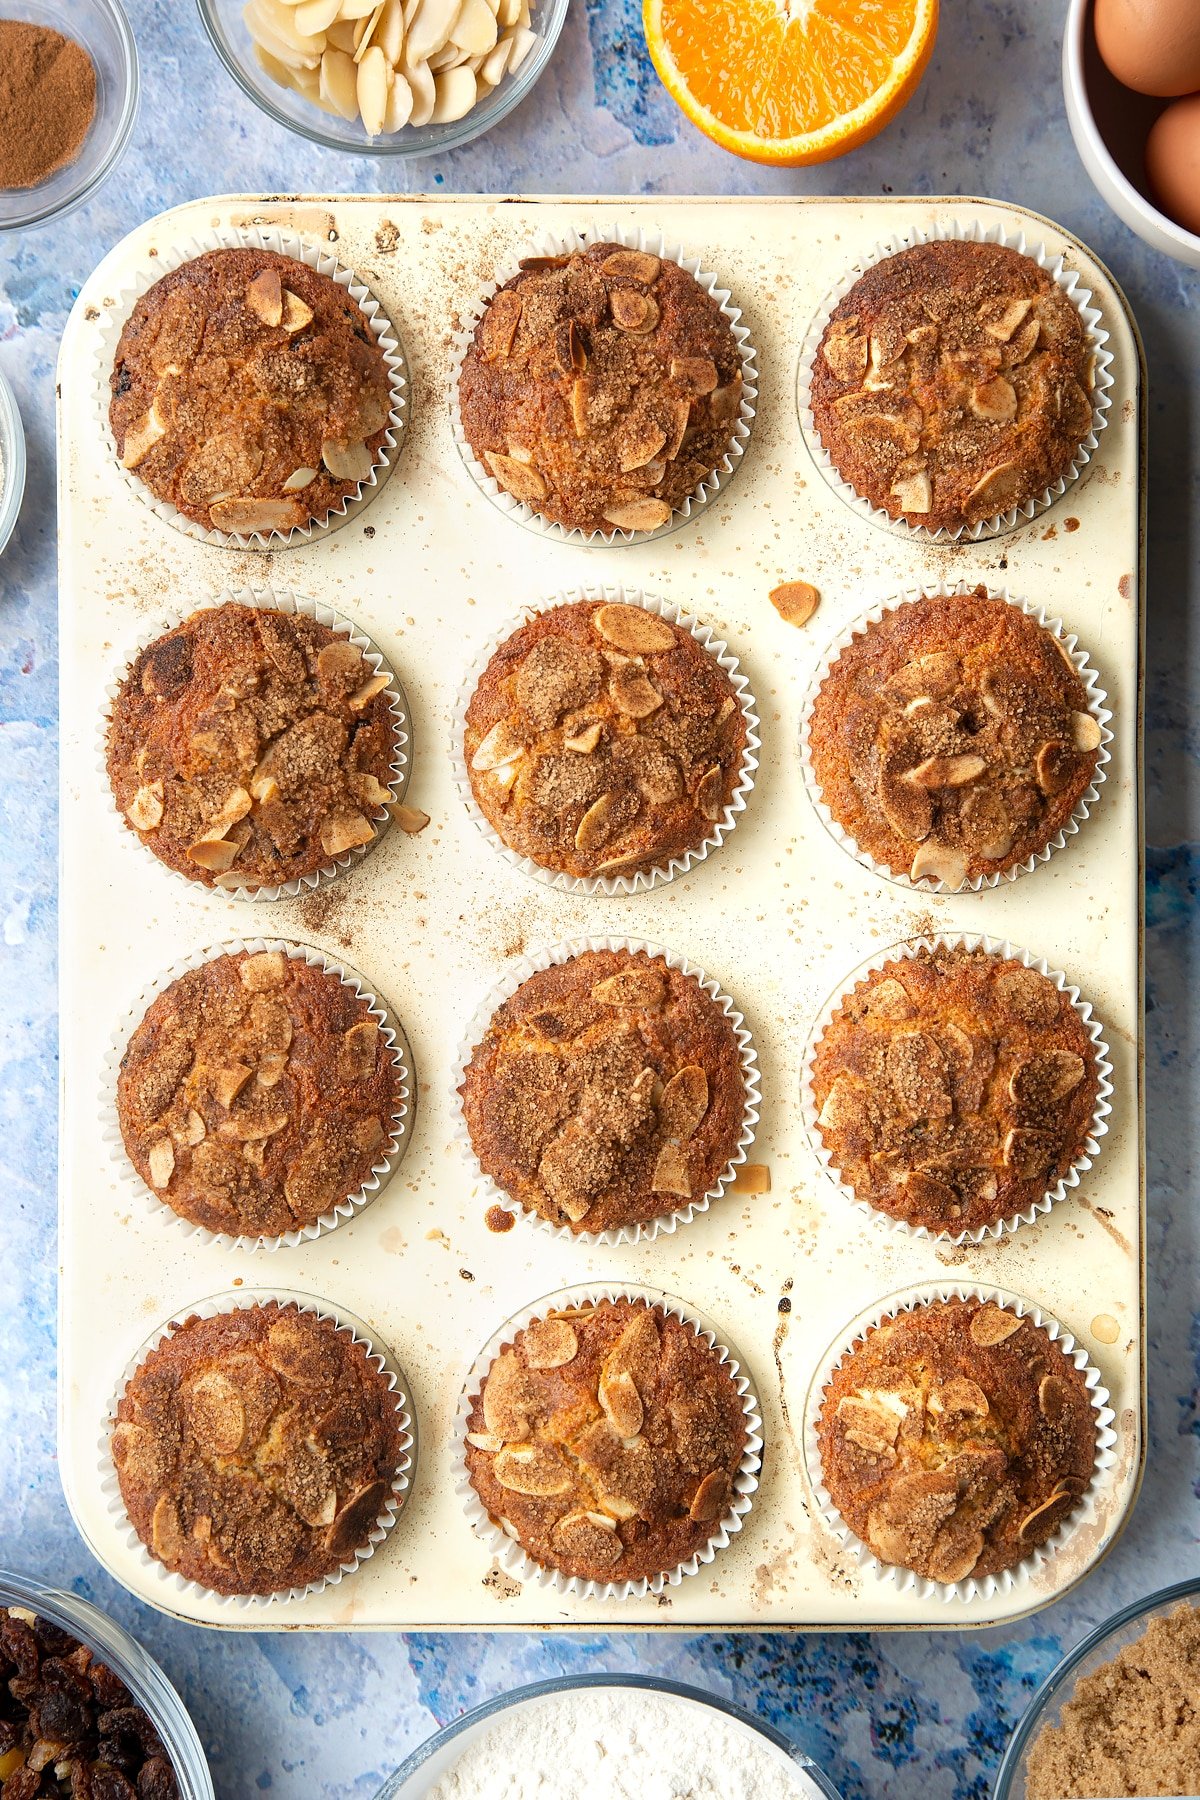 Overhead shot of baked orange and cinnamon muffins in a muffin tray